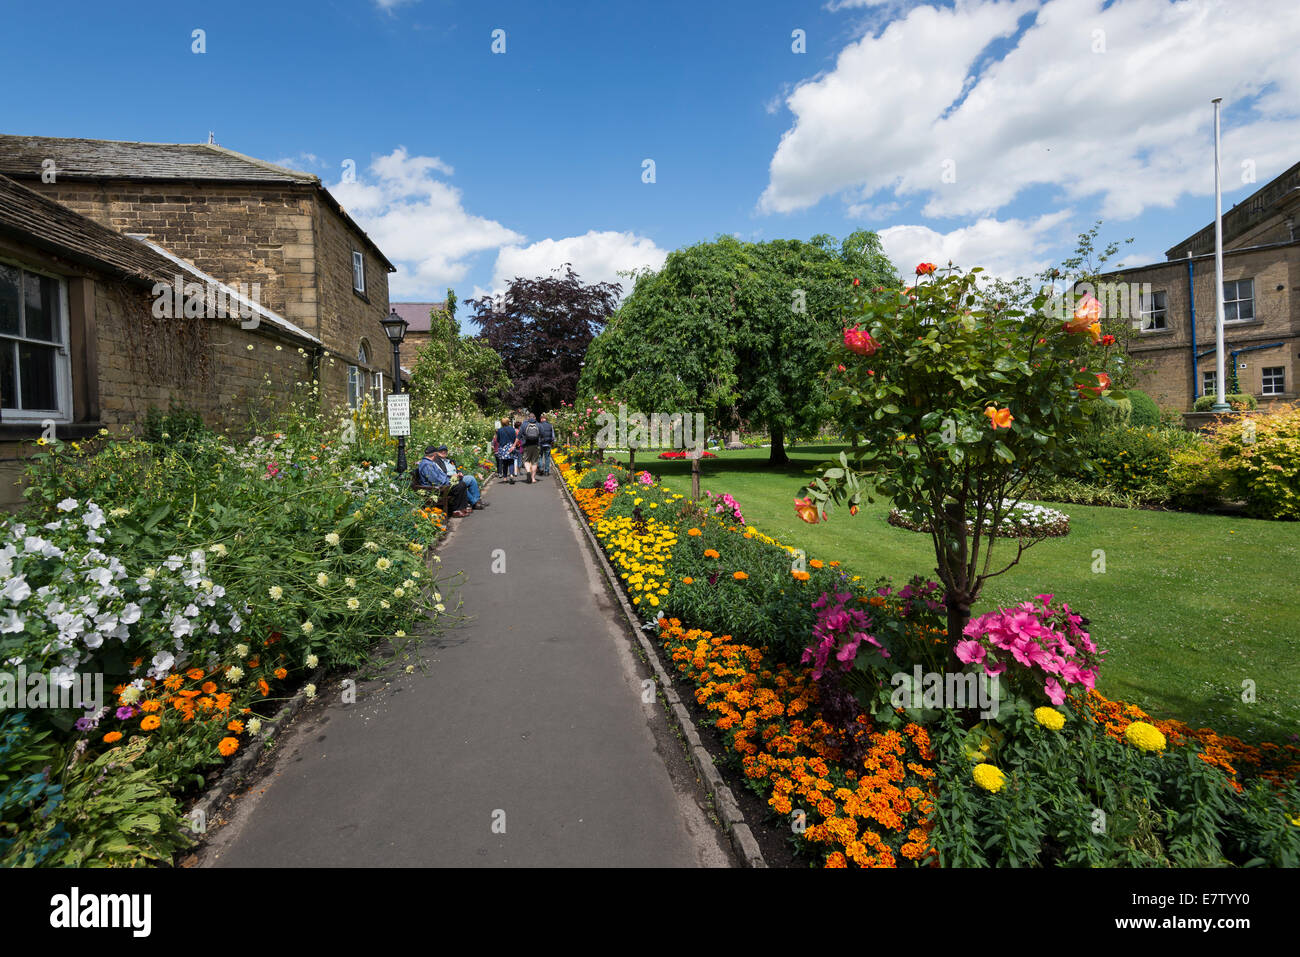 Bath gardens a council run area of lawns, flowersbeds,and seating  in Bakewell Peak District Derbyshire Stock Photo